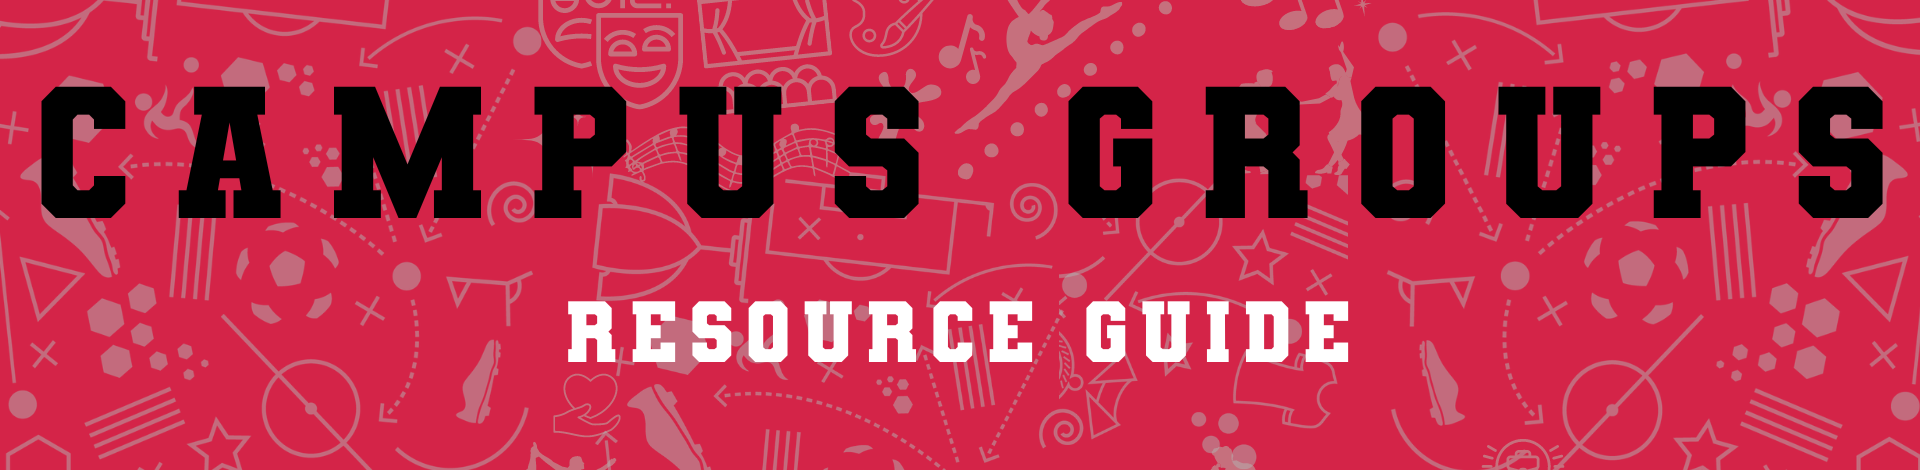 Campus Groups Resource Guide Banner, Red background with Black "Campus Groups" and White " Resource Guide" Text